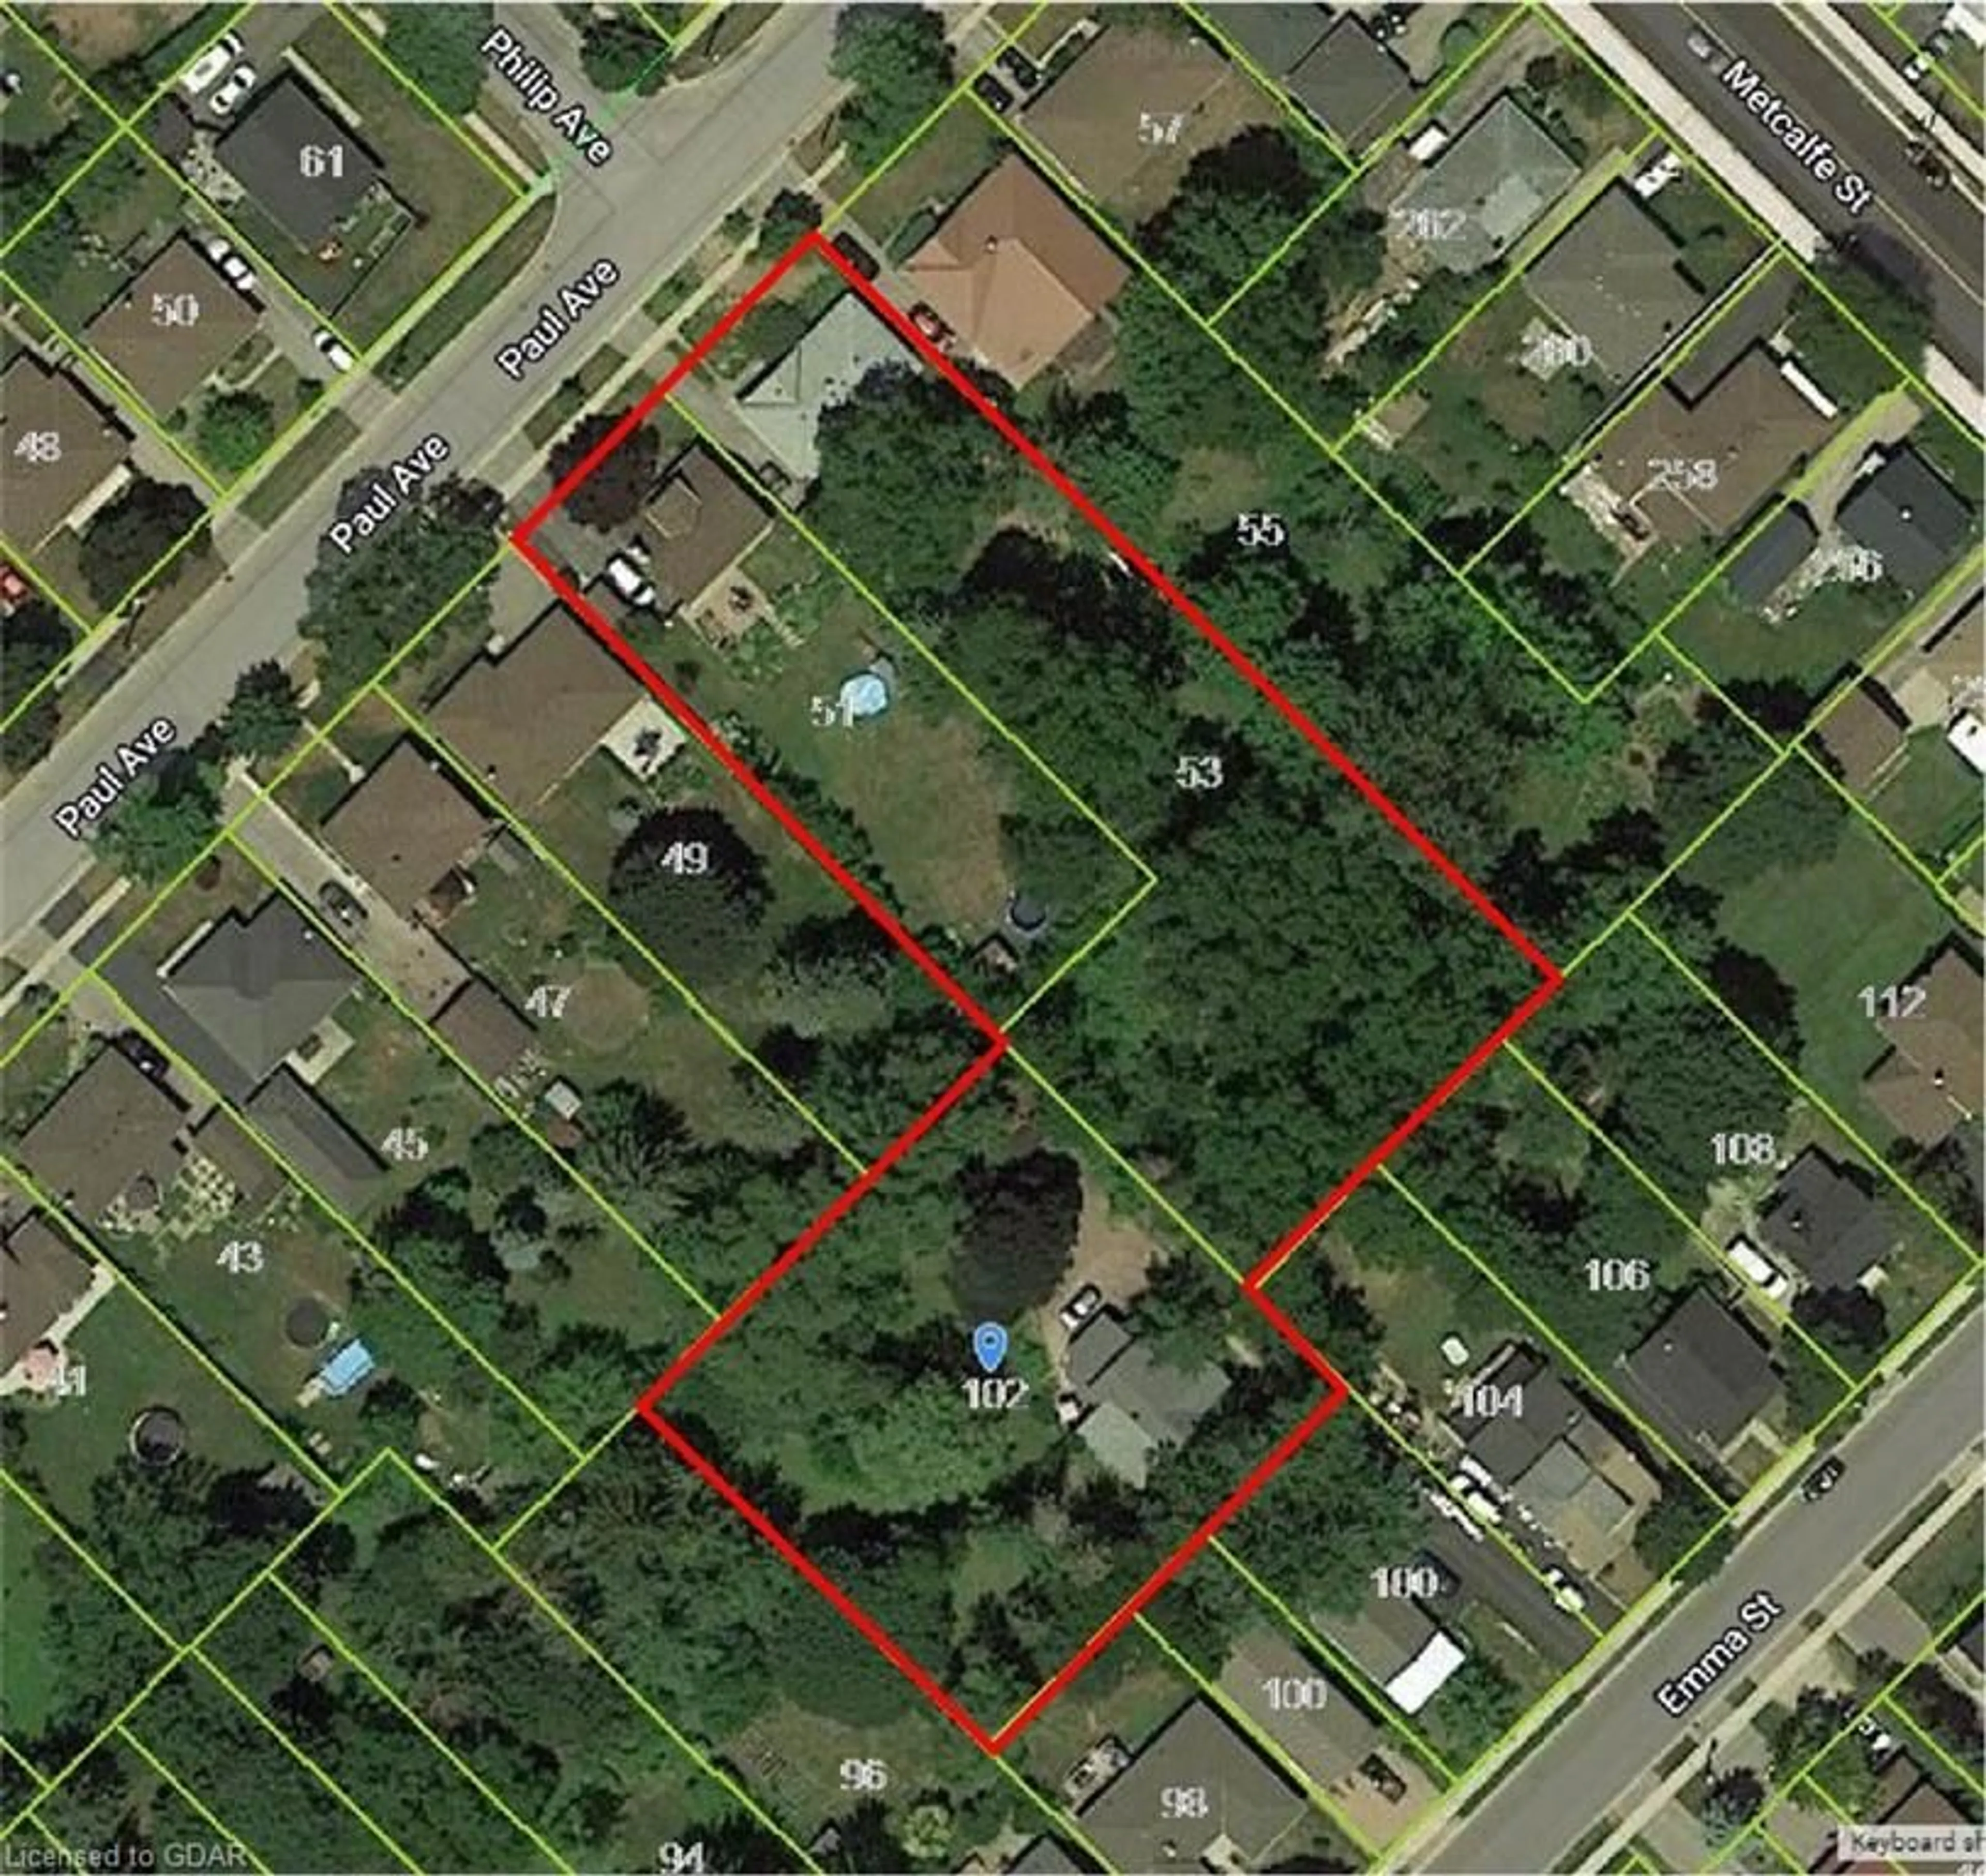 Picture of a map for 53 Paul Ave, Guelph Ontario N1E 1S3